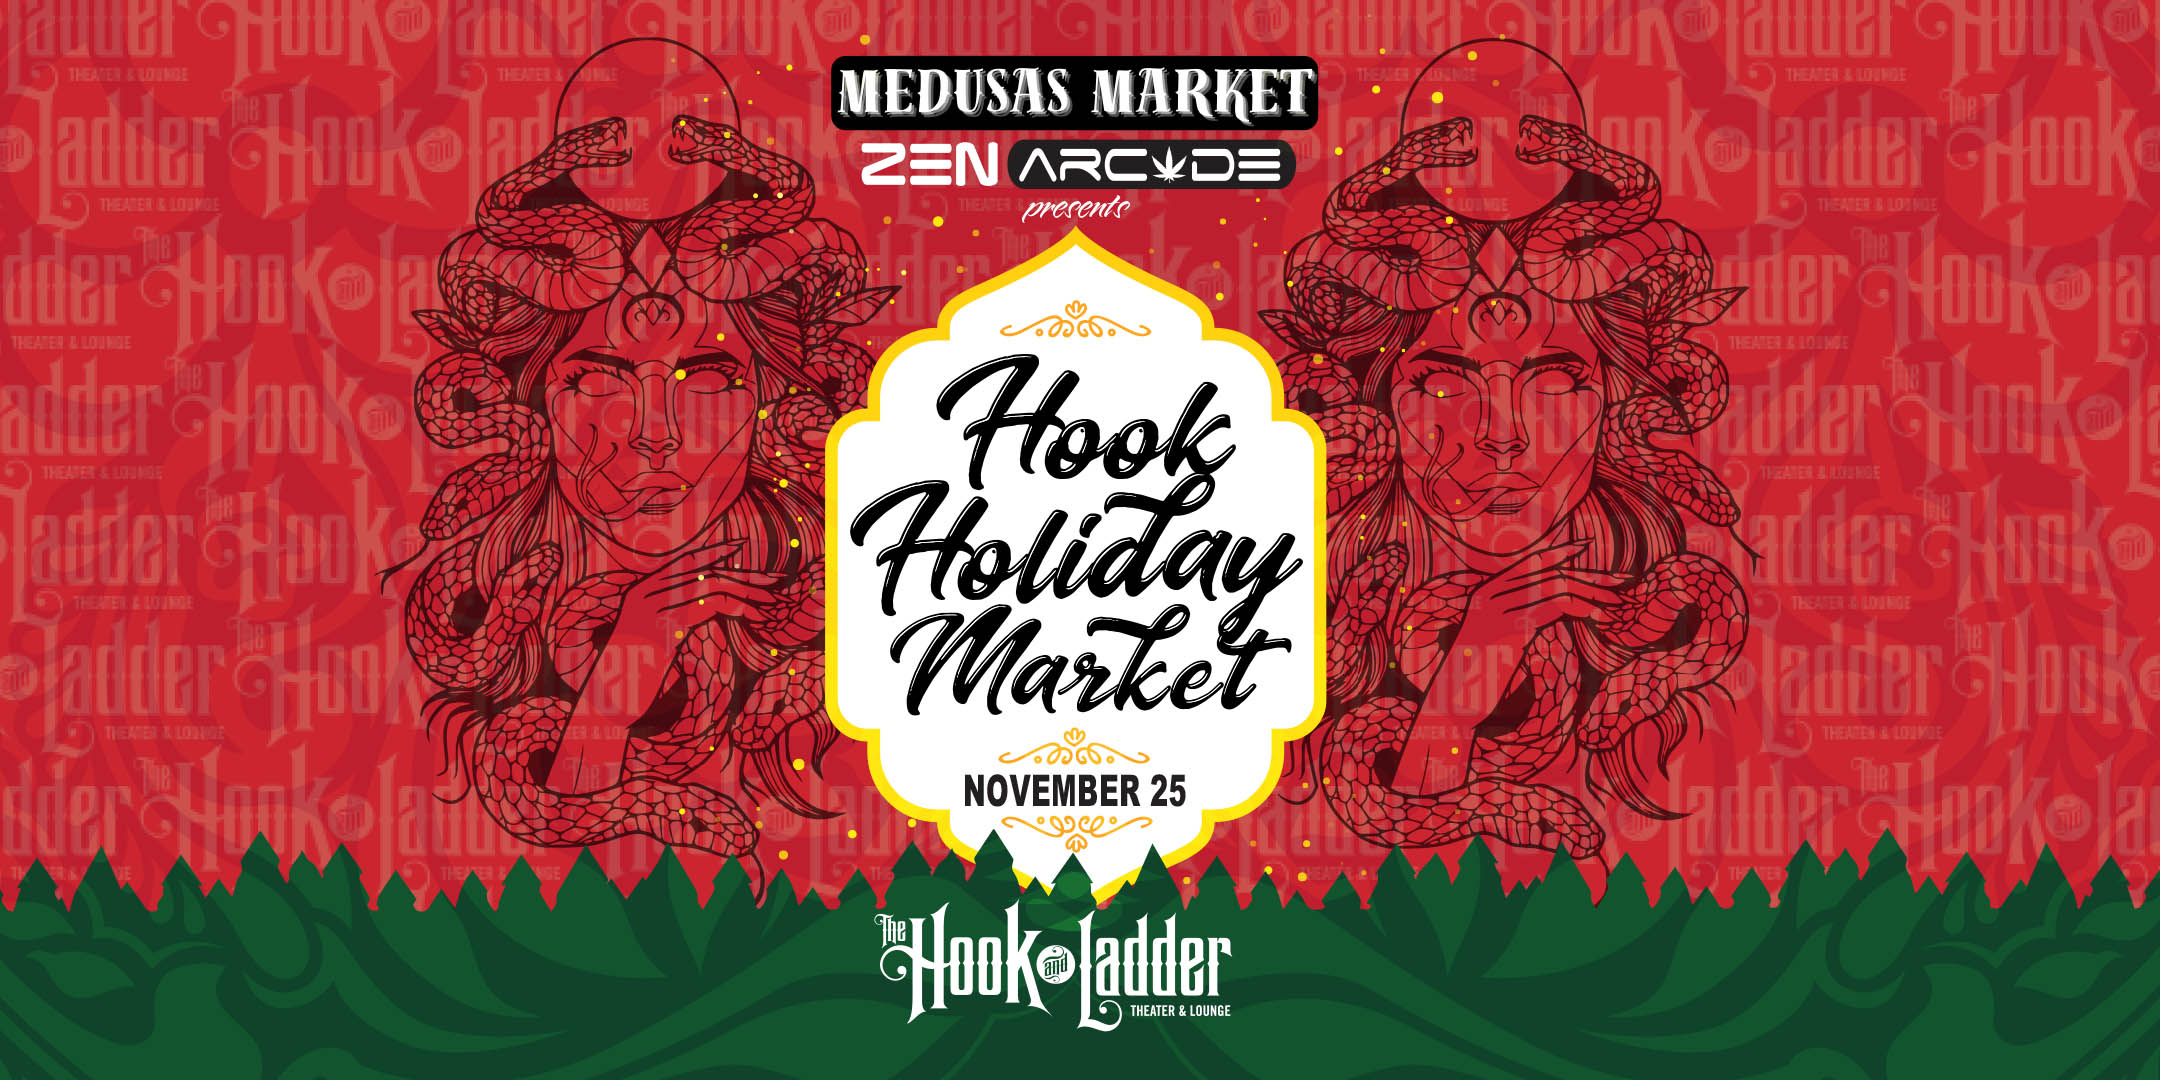 Medusa’s Market & Zen Arcade present Hook Holiday Market Saturday, November 25 The Hook and Ladder Theater, Mission Room, & Zen Arcade 12pm - 5pm :: All Ages (21+ in Zen Arcade):: FREE Register in advance and be entered to win a pack of Yummi.Life edible gummies. 10 winners picked, must be on-site to win!